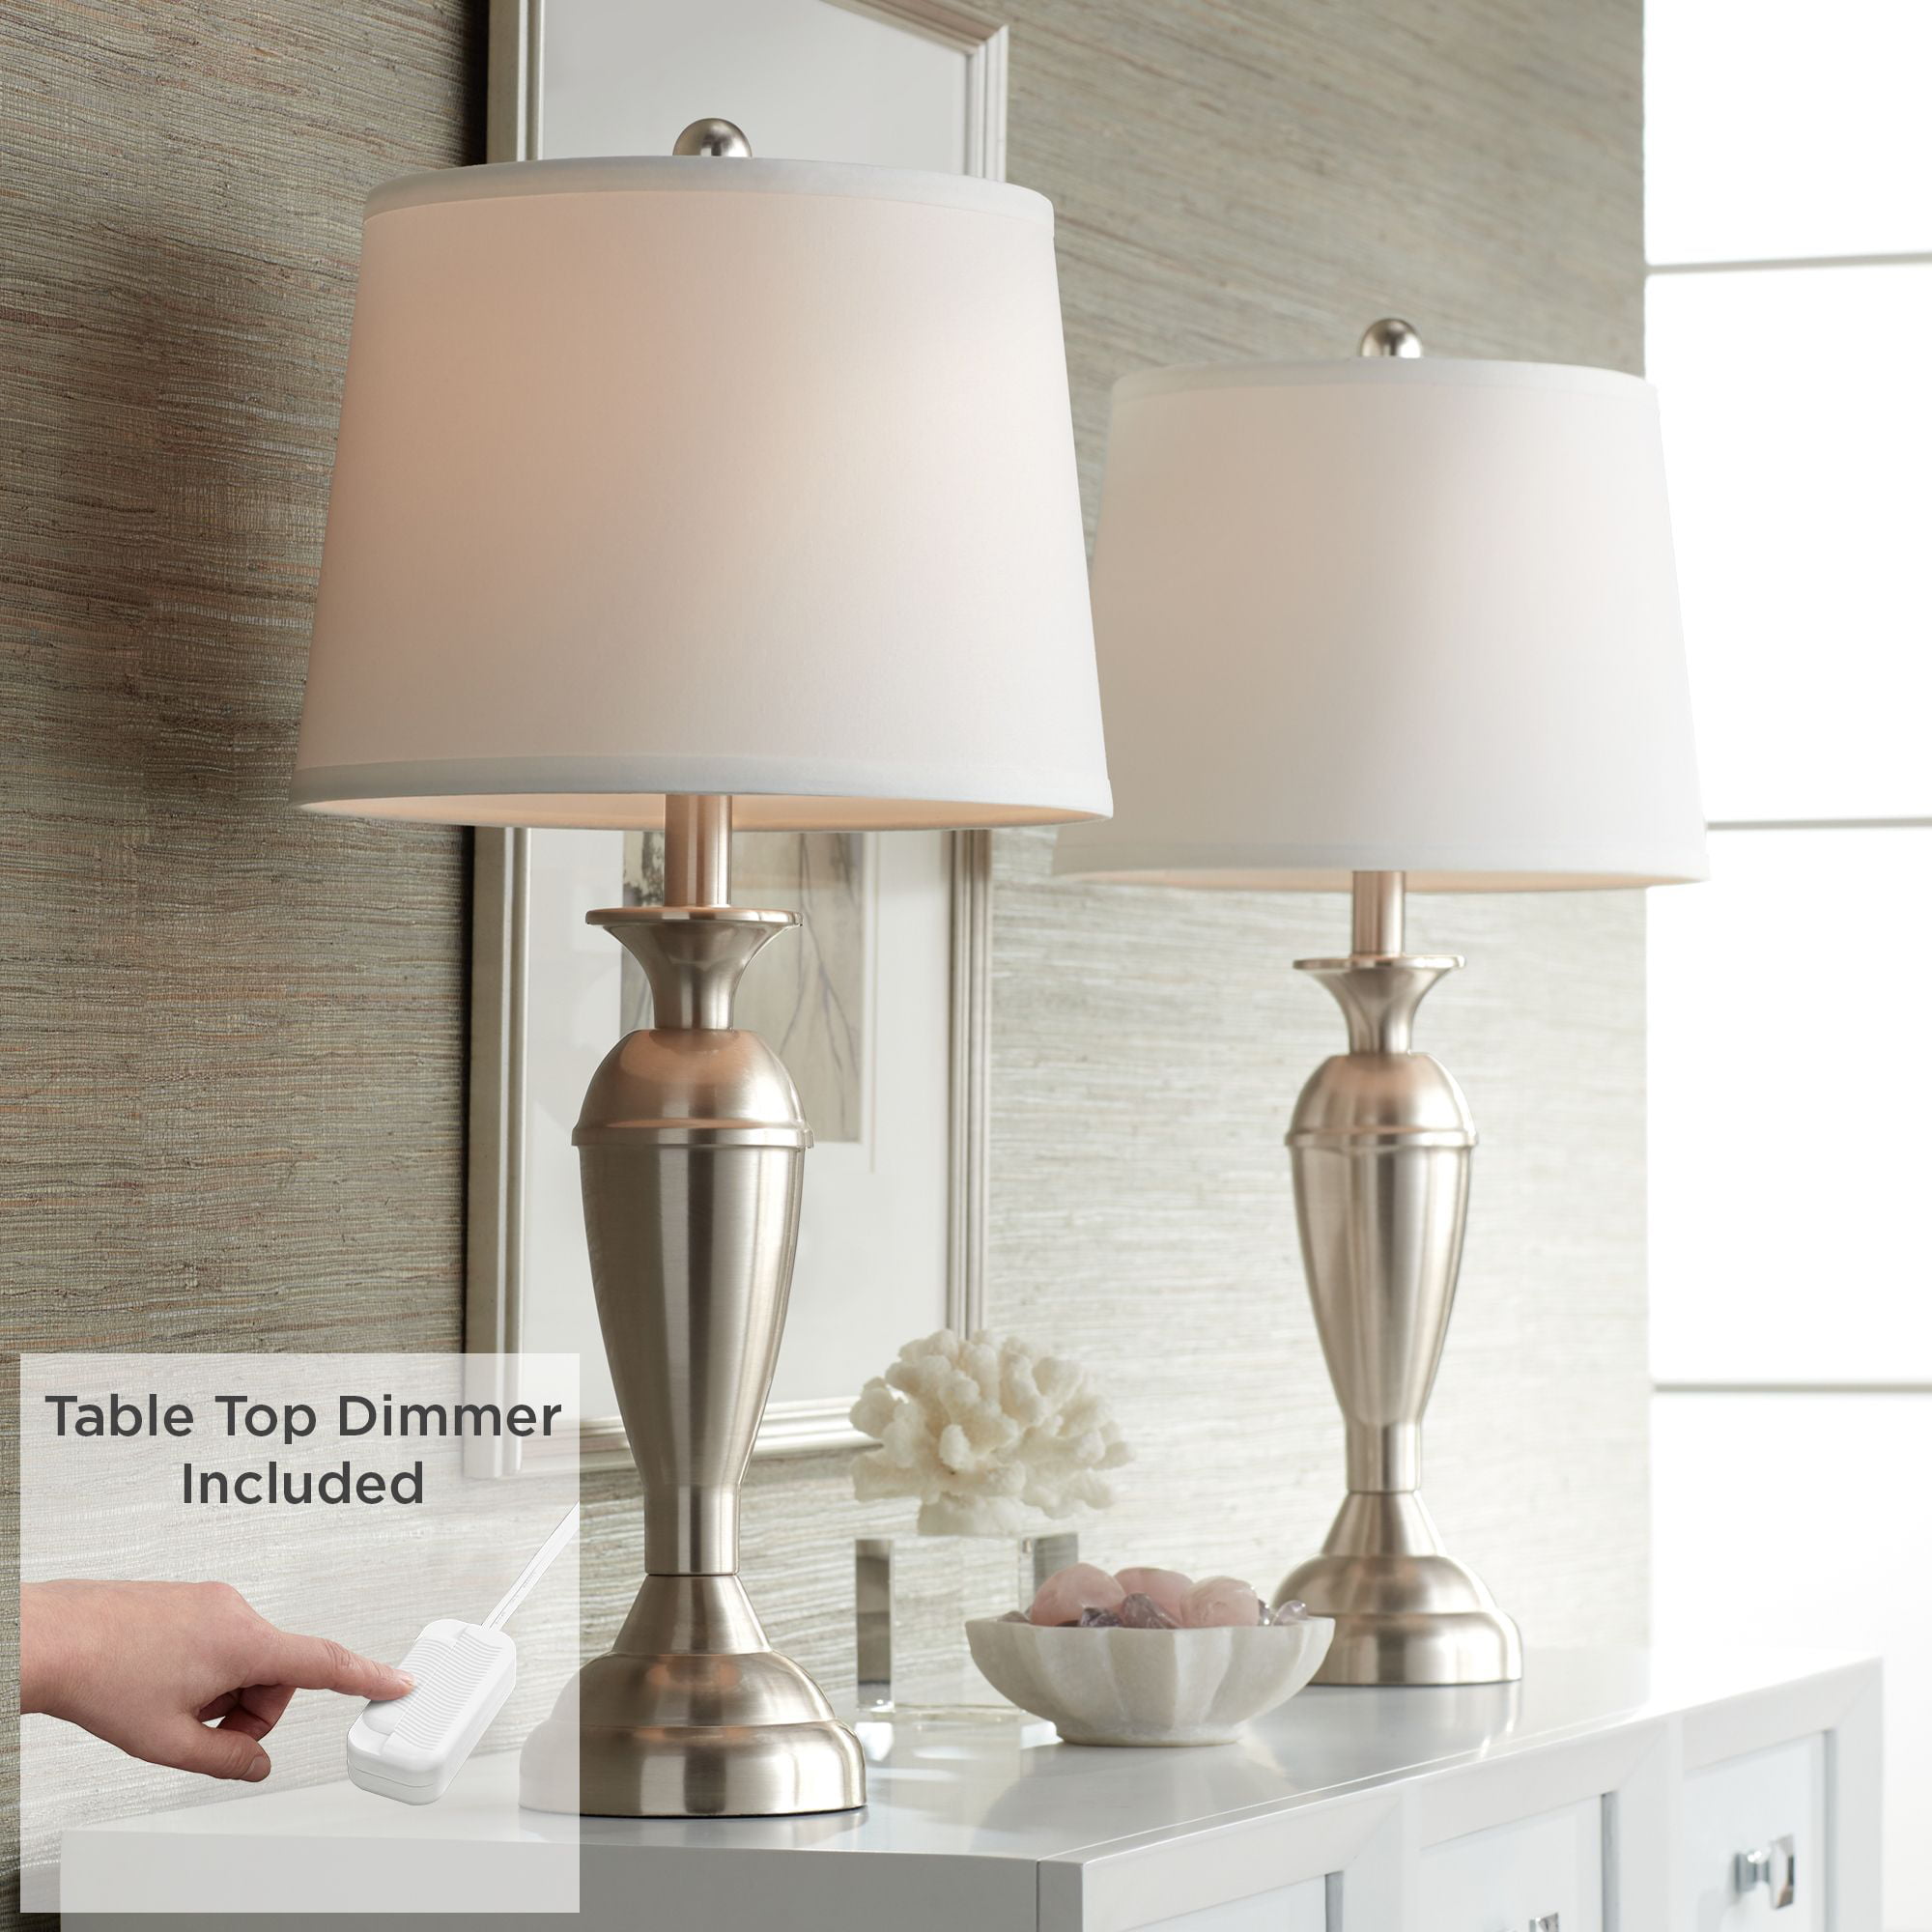 Table Top Dimmers Brushed Nickel White, End Table Lamps For Living Room